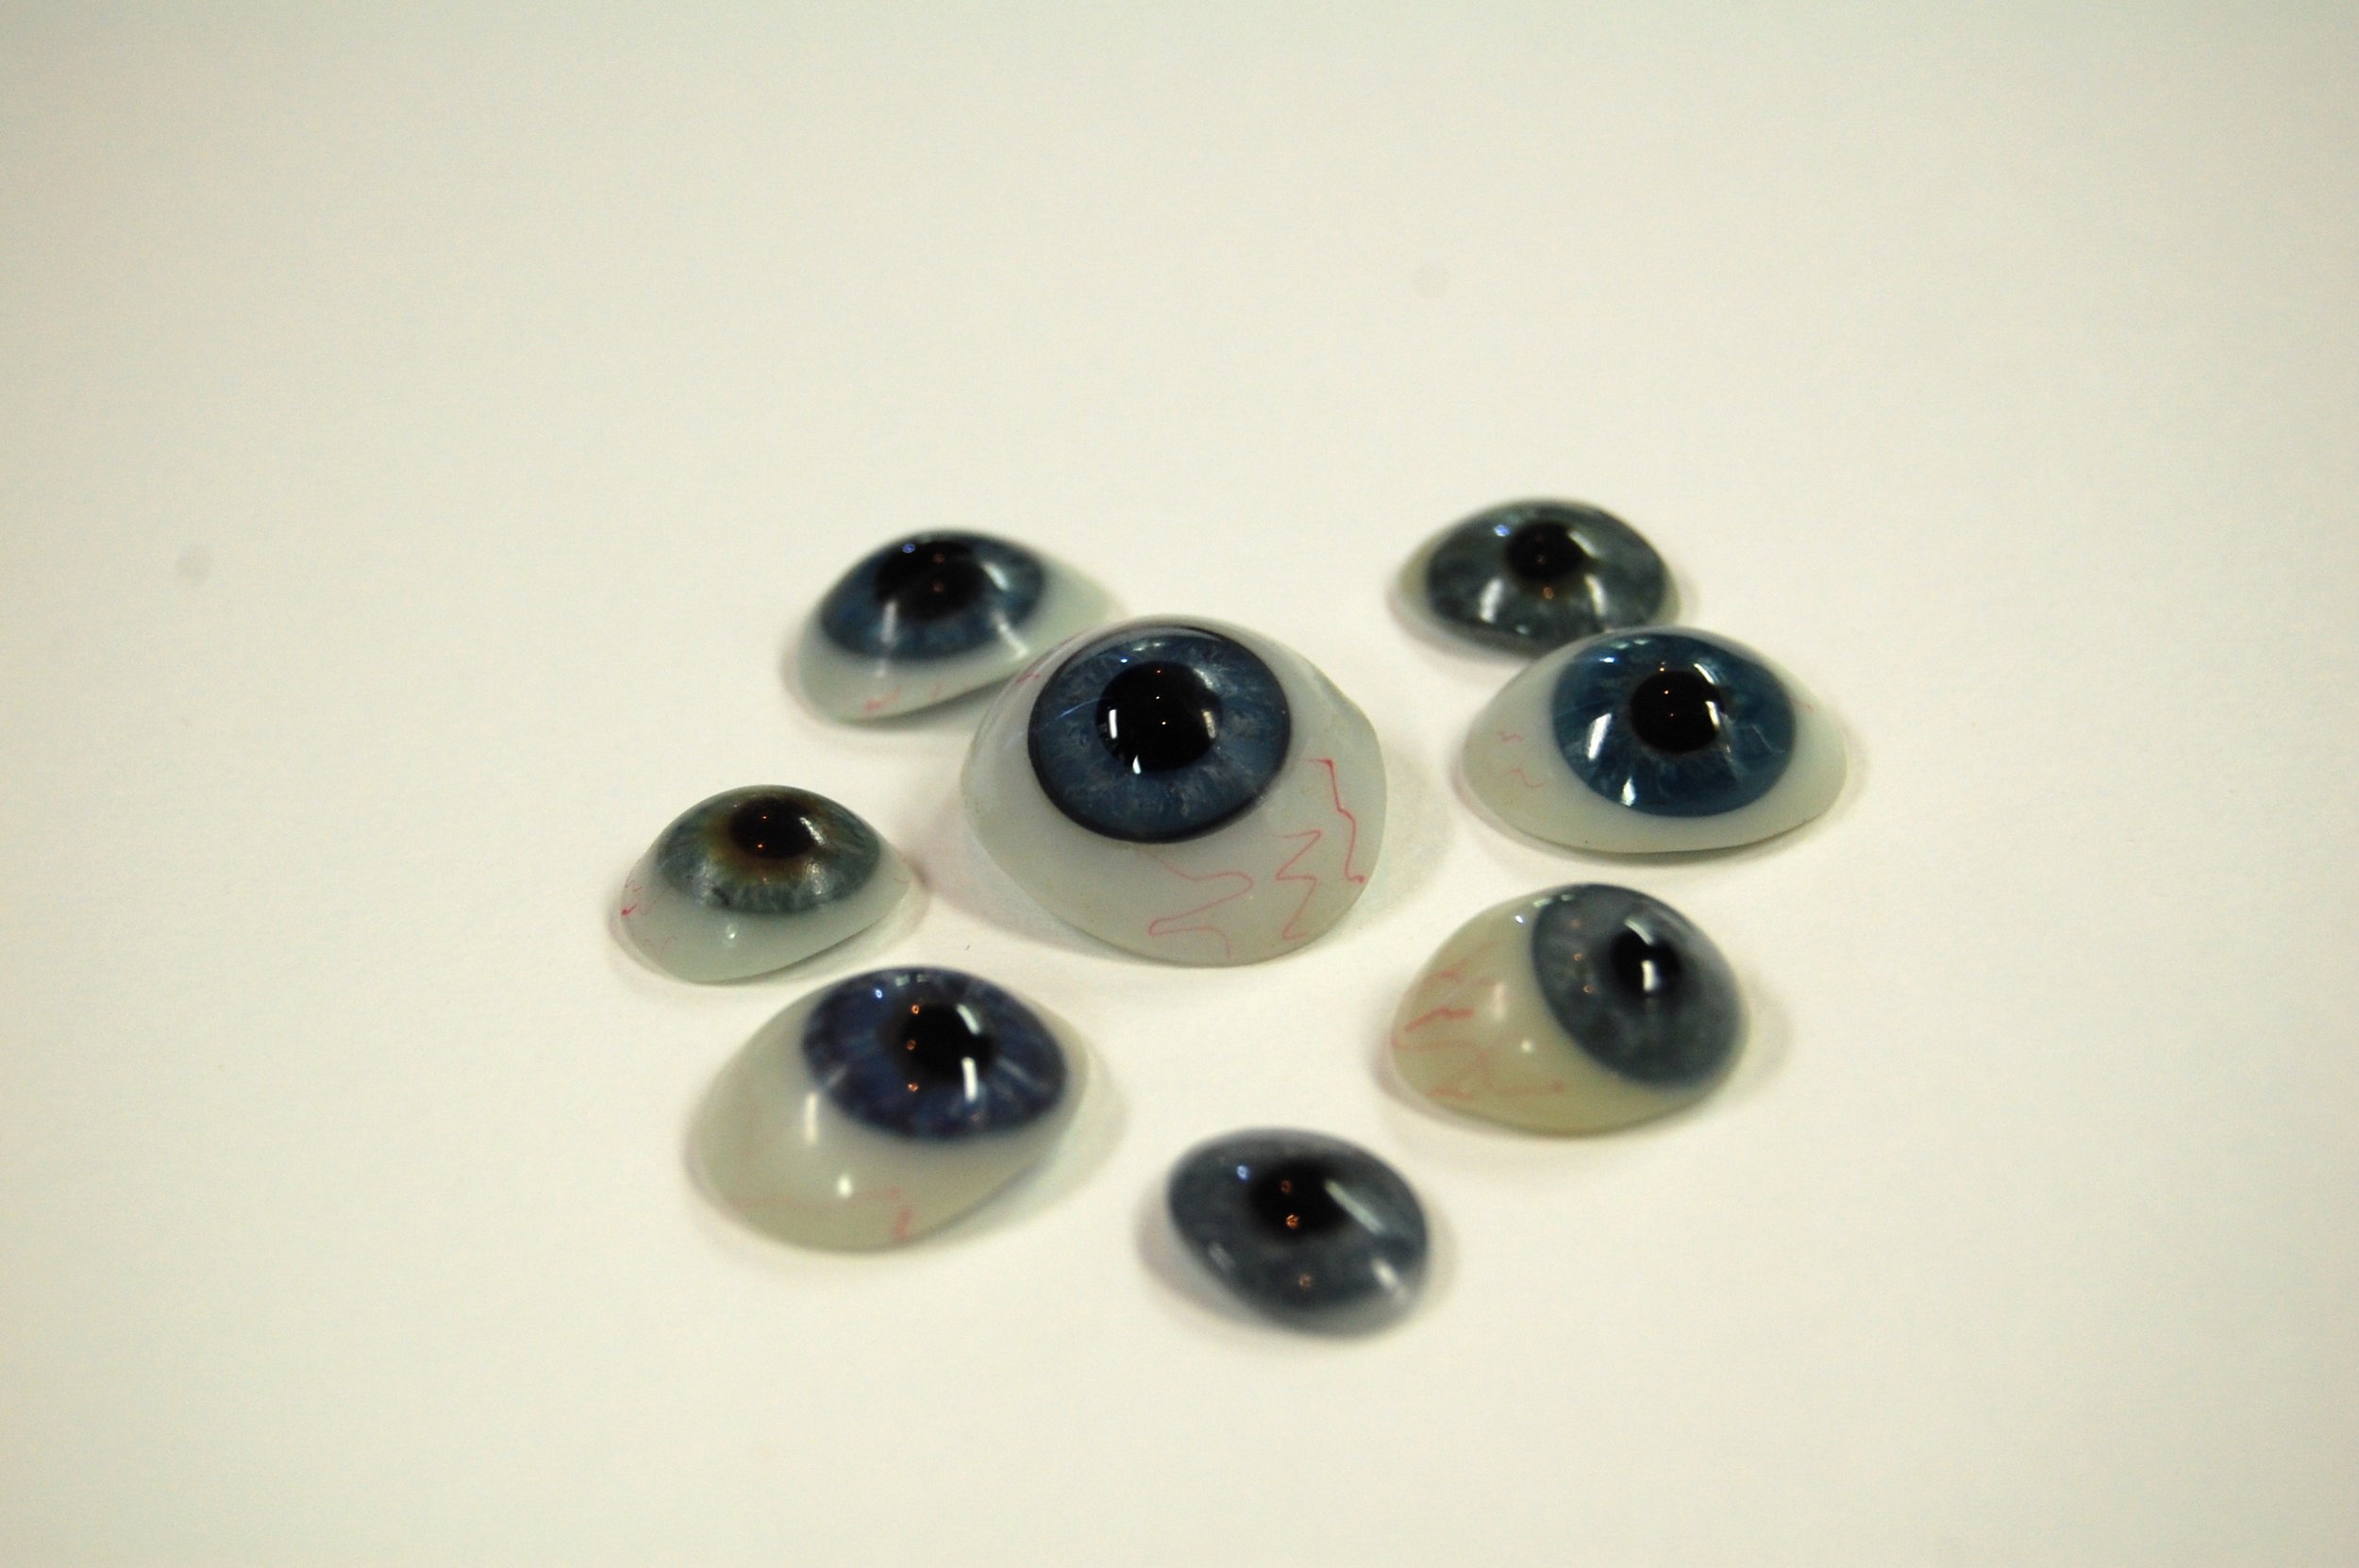 Artificial glass eyes